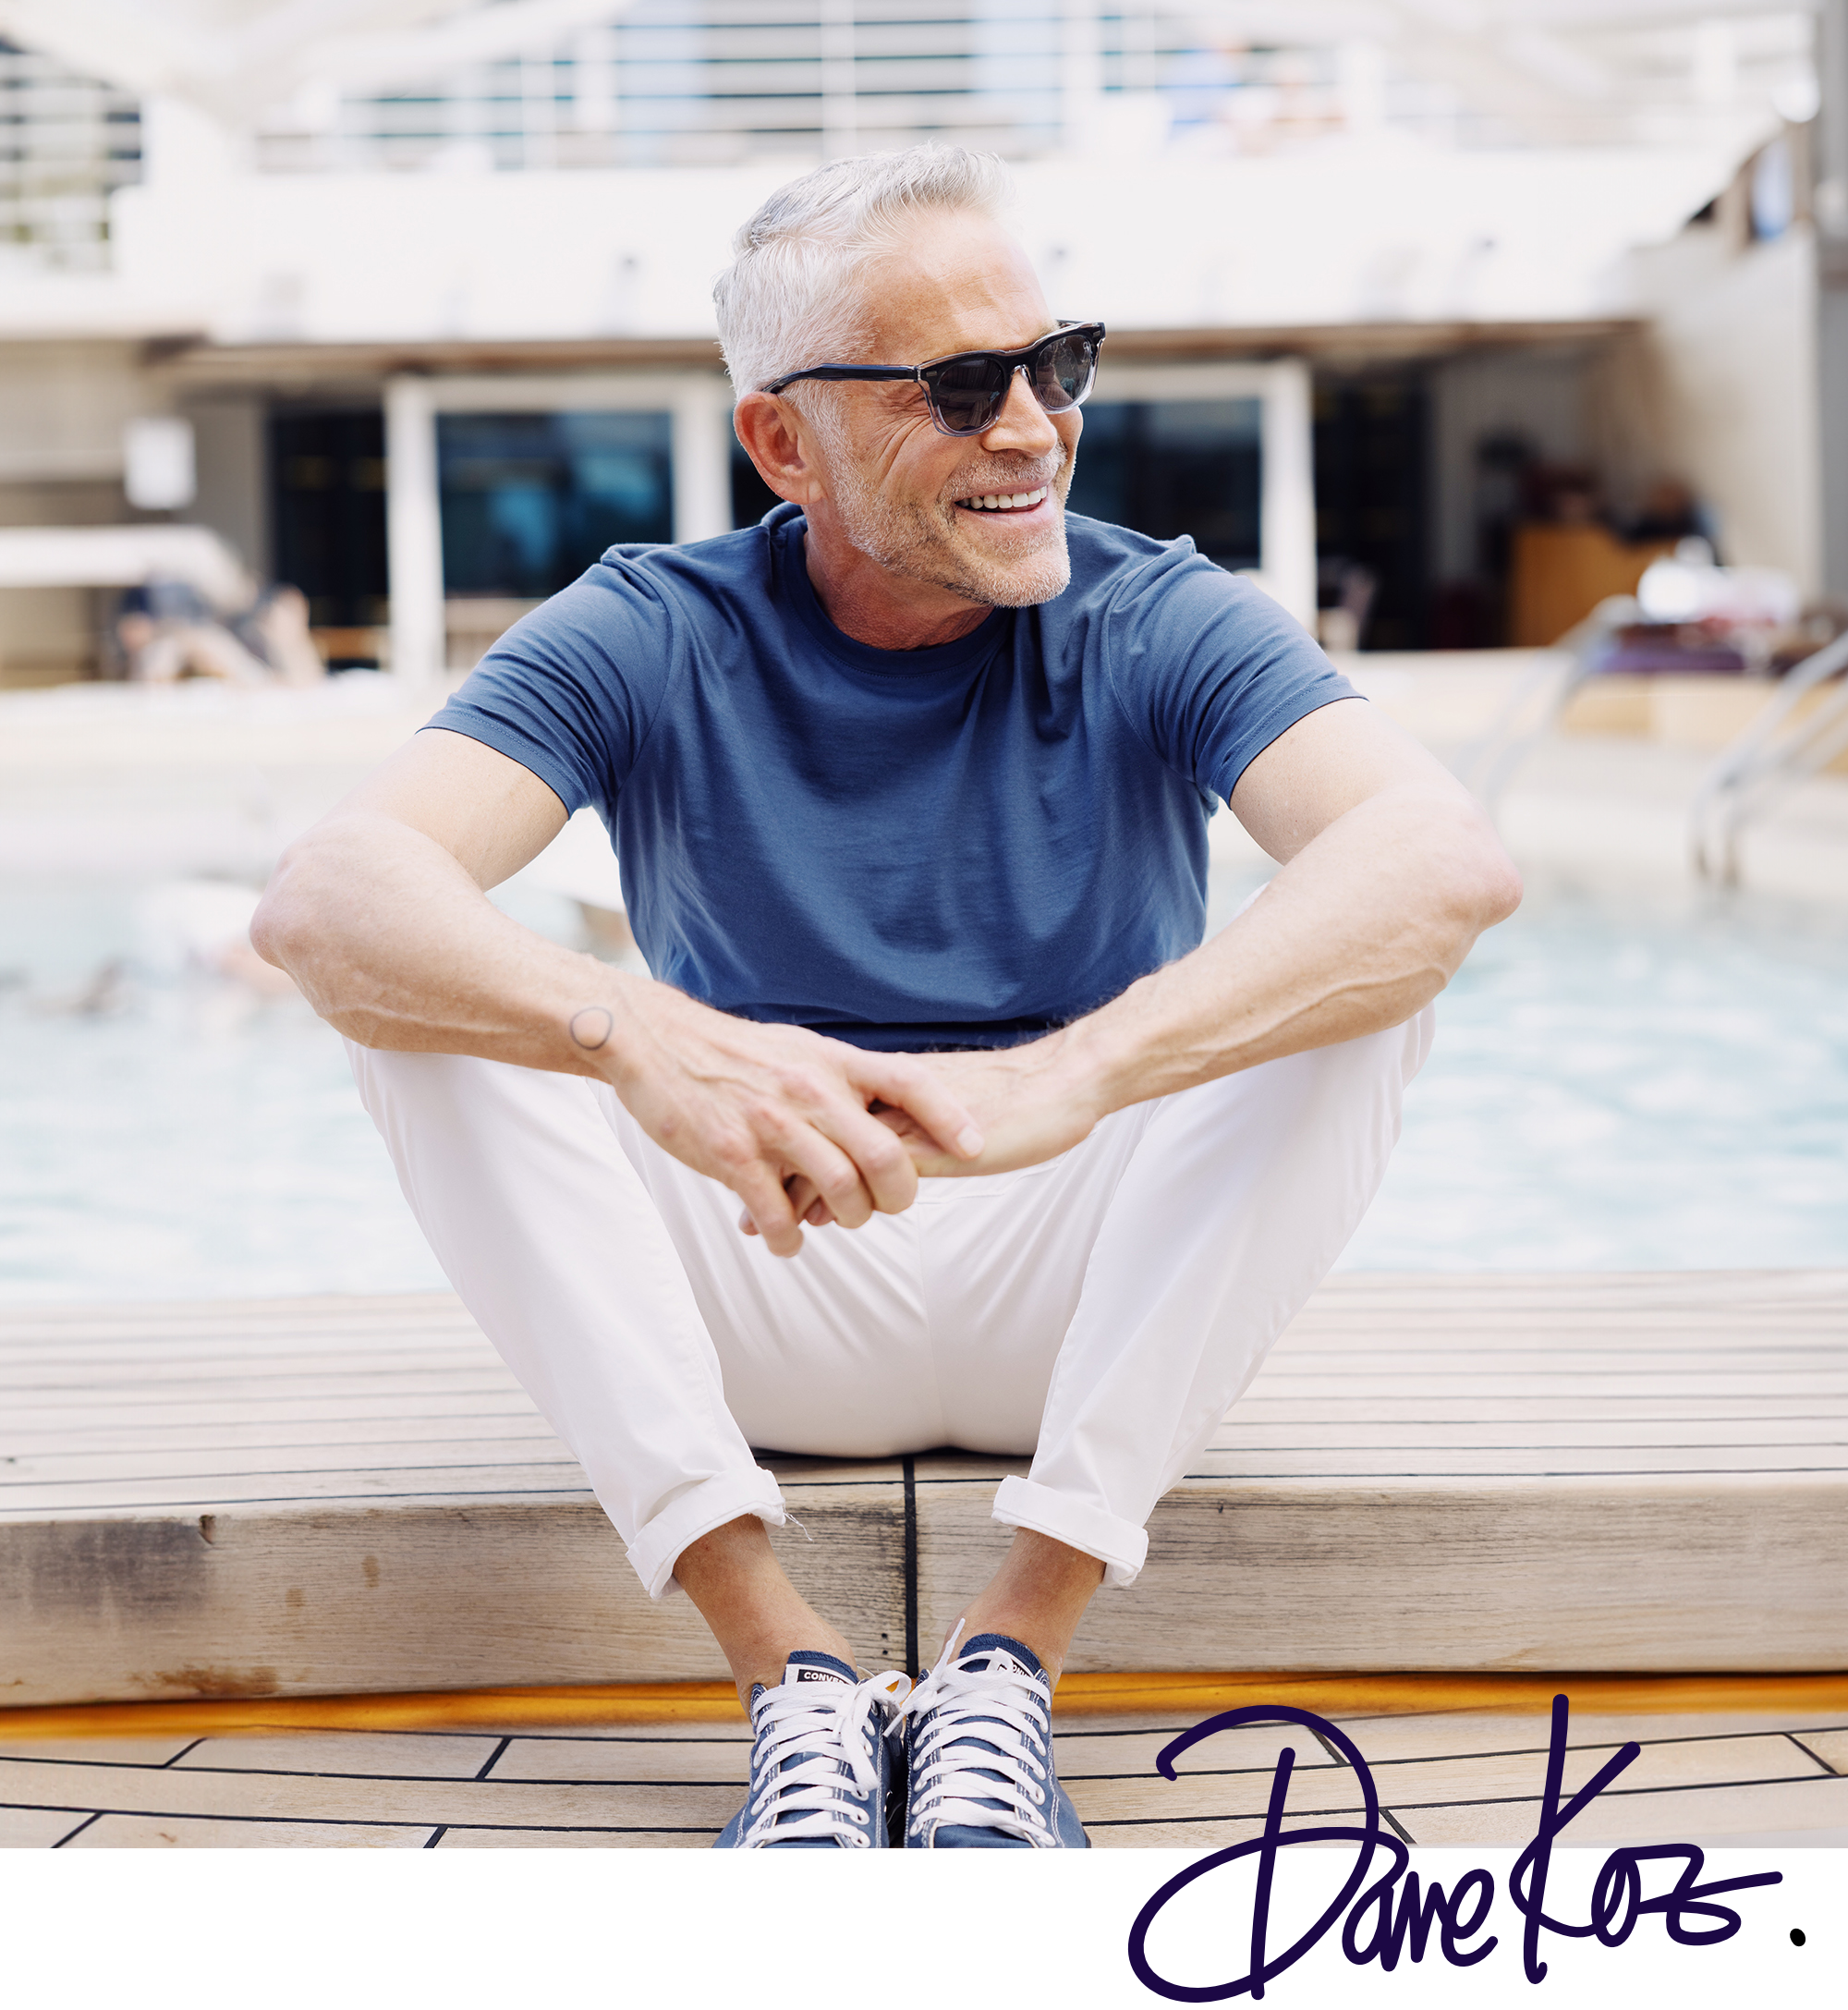 Dave-Poolside-Square-Logo-opt